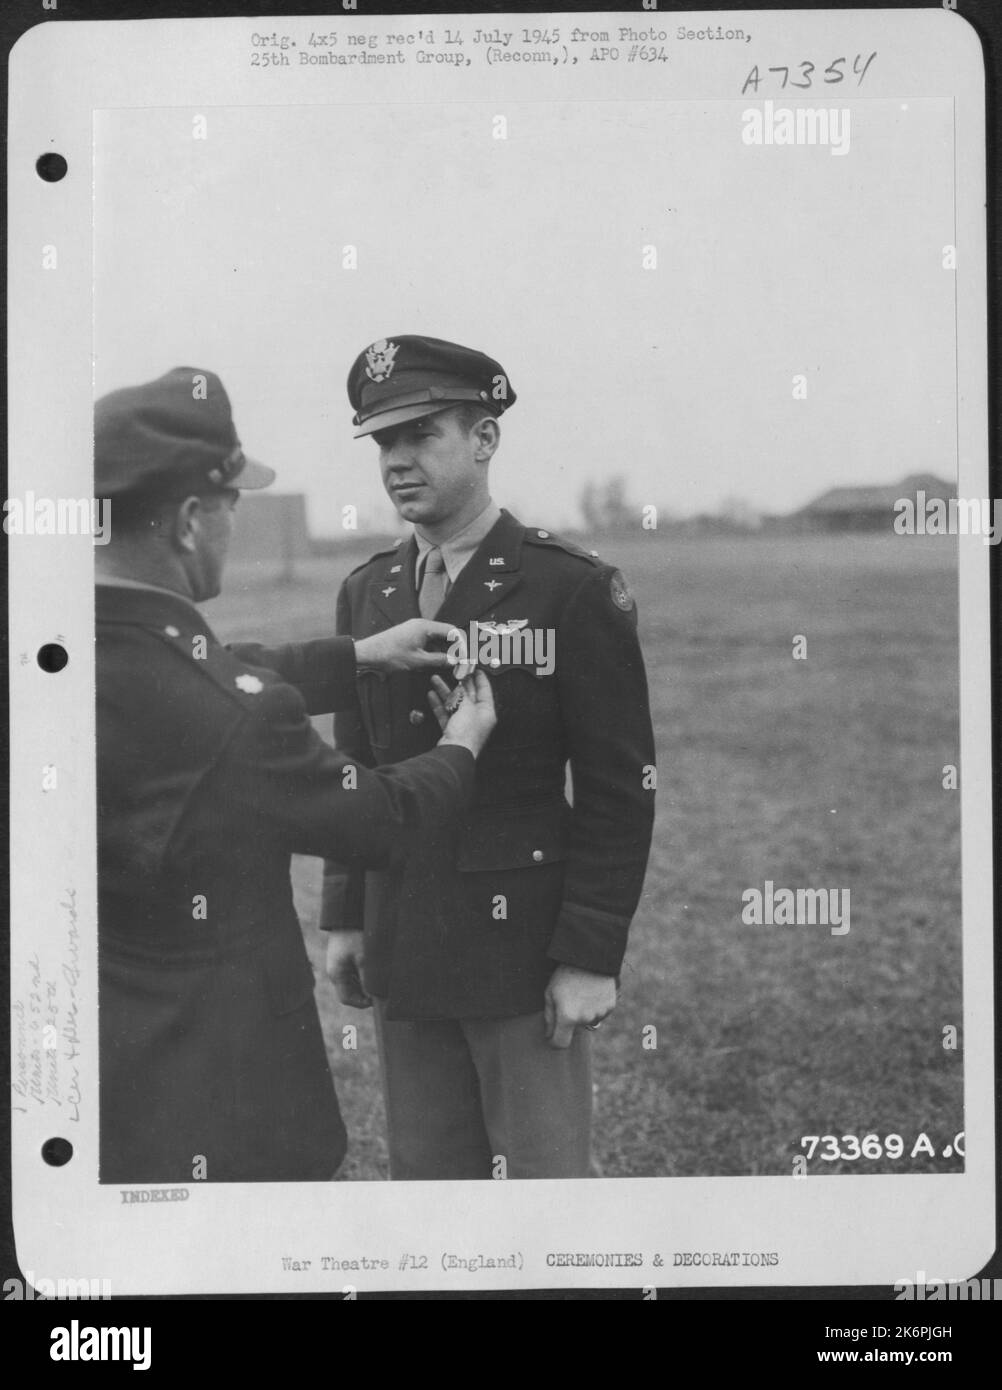 Lt. H. Roberson Of The 652Nd Weather Reconnaissance Squadron, 25Th Weather Reconnaissance Group Is Presented The Air Medal At An 8Th Air Force Base In England. 10 June 1944. Stock Photo